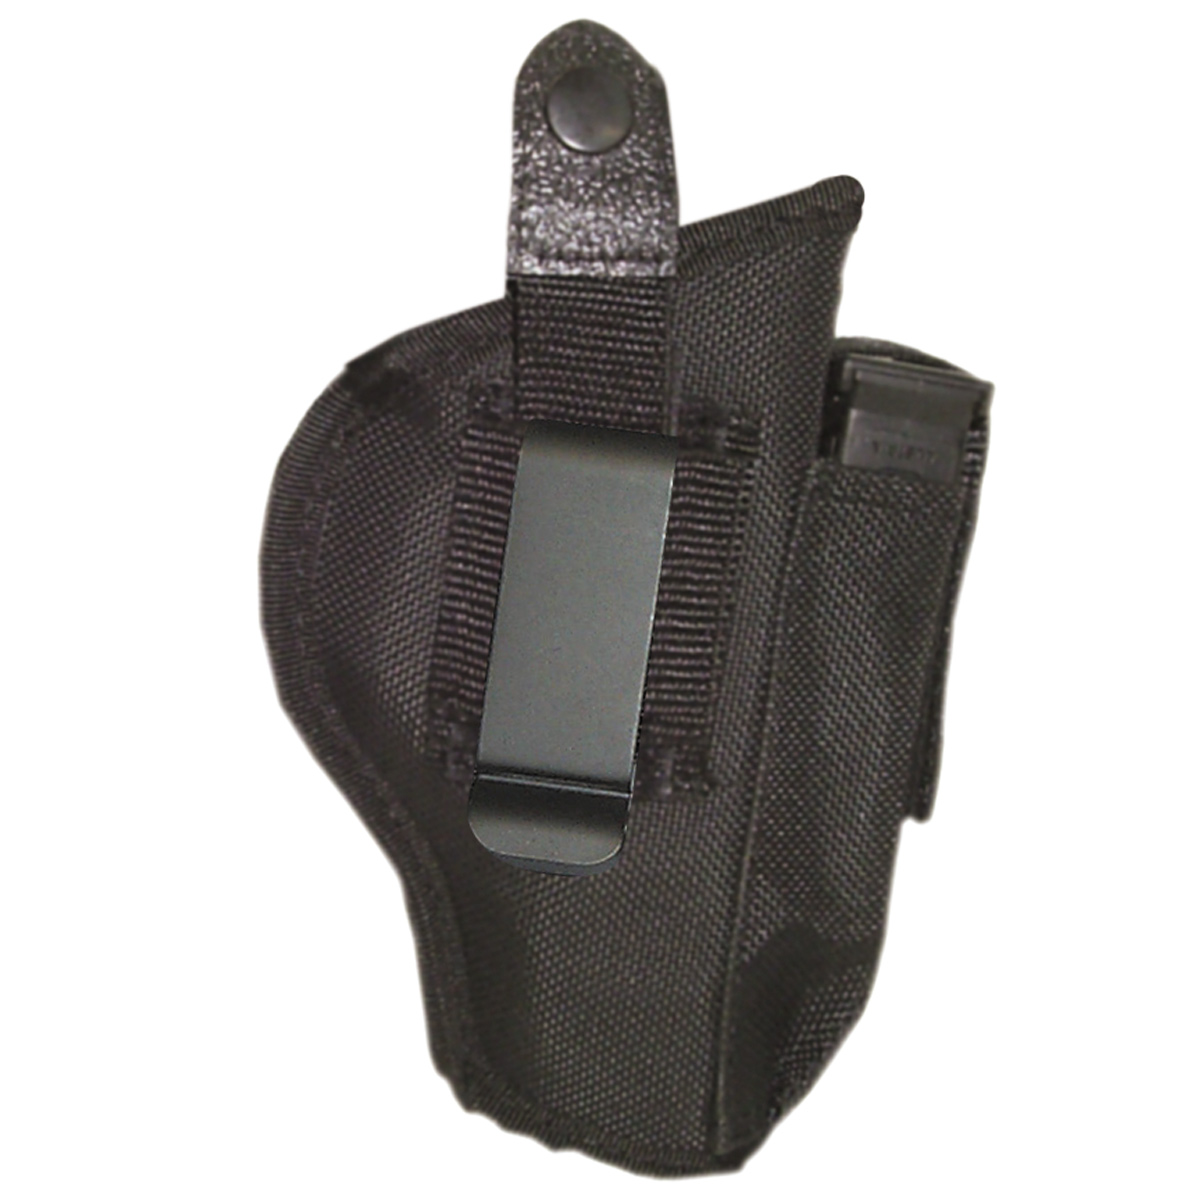 Shop Extra Mag Holsters Now